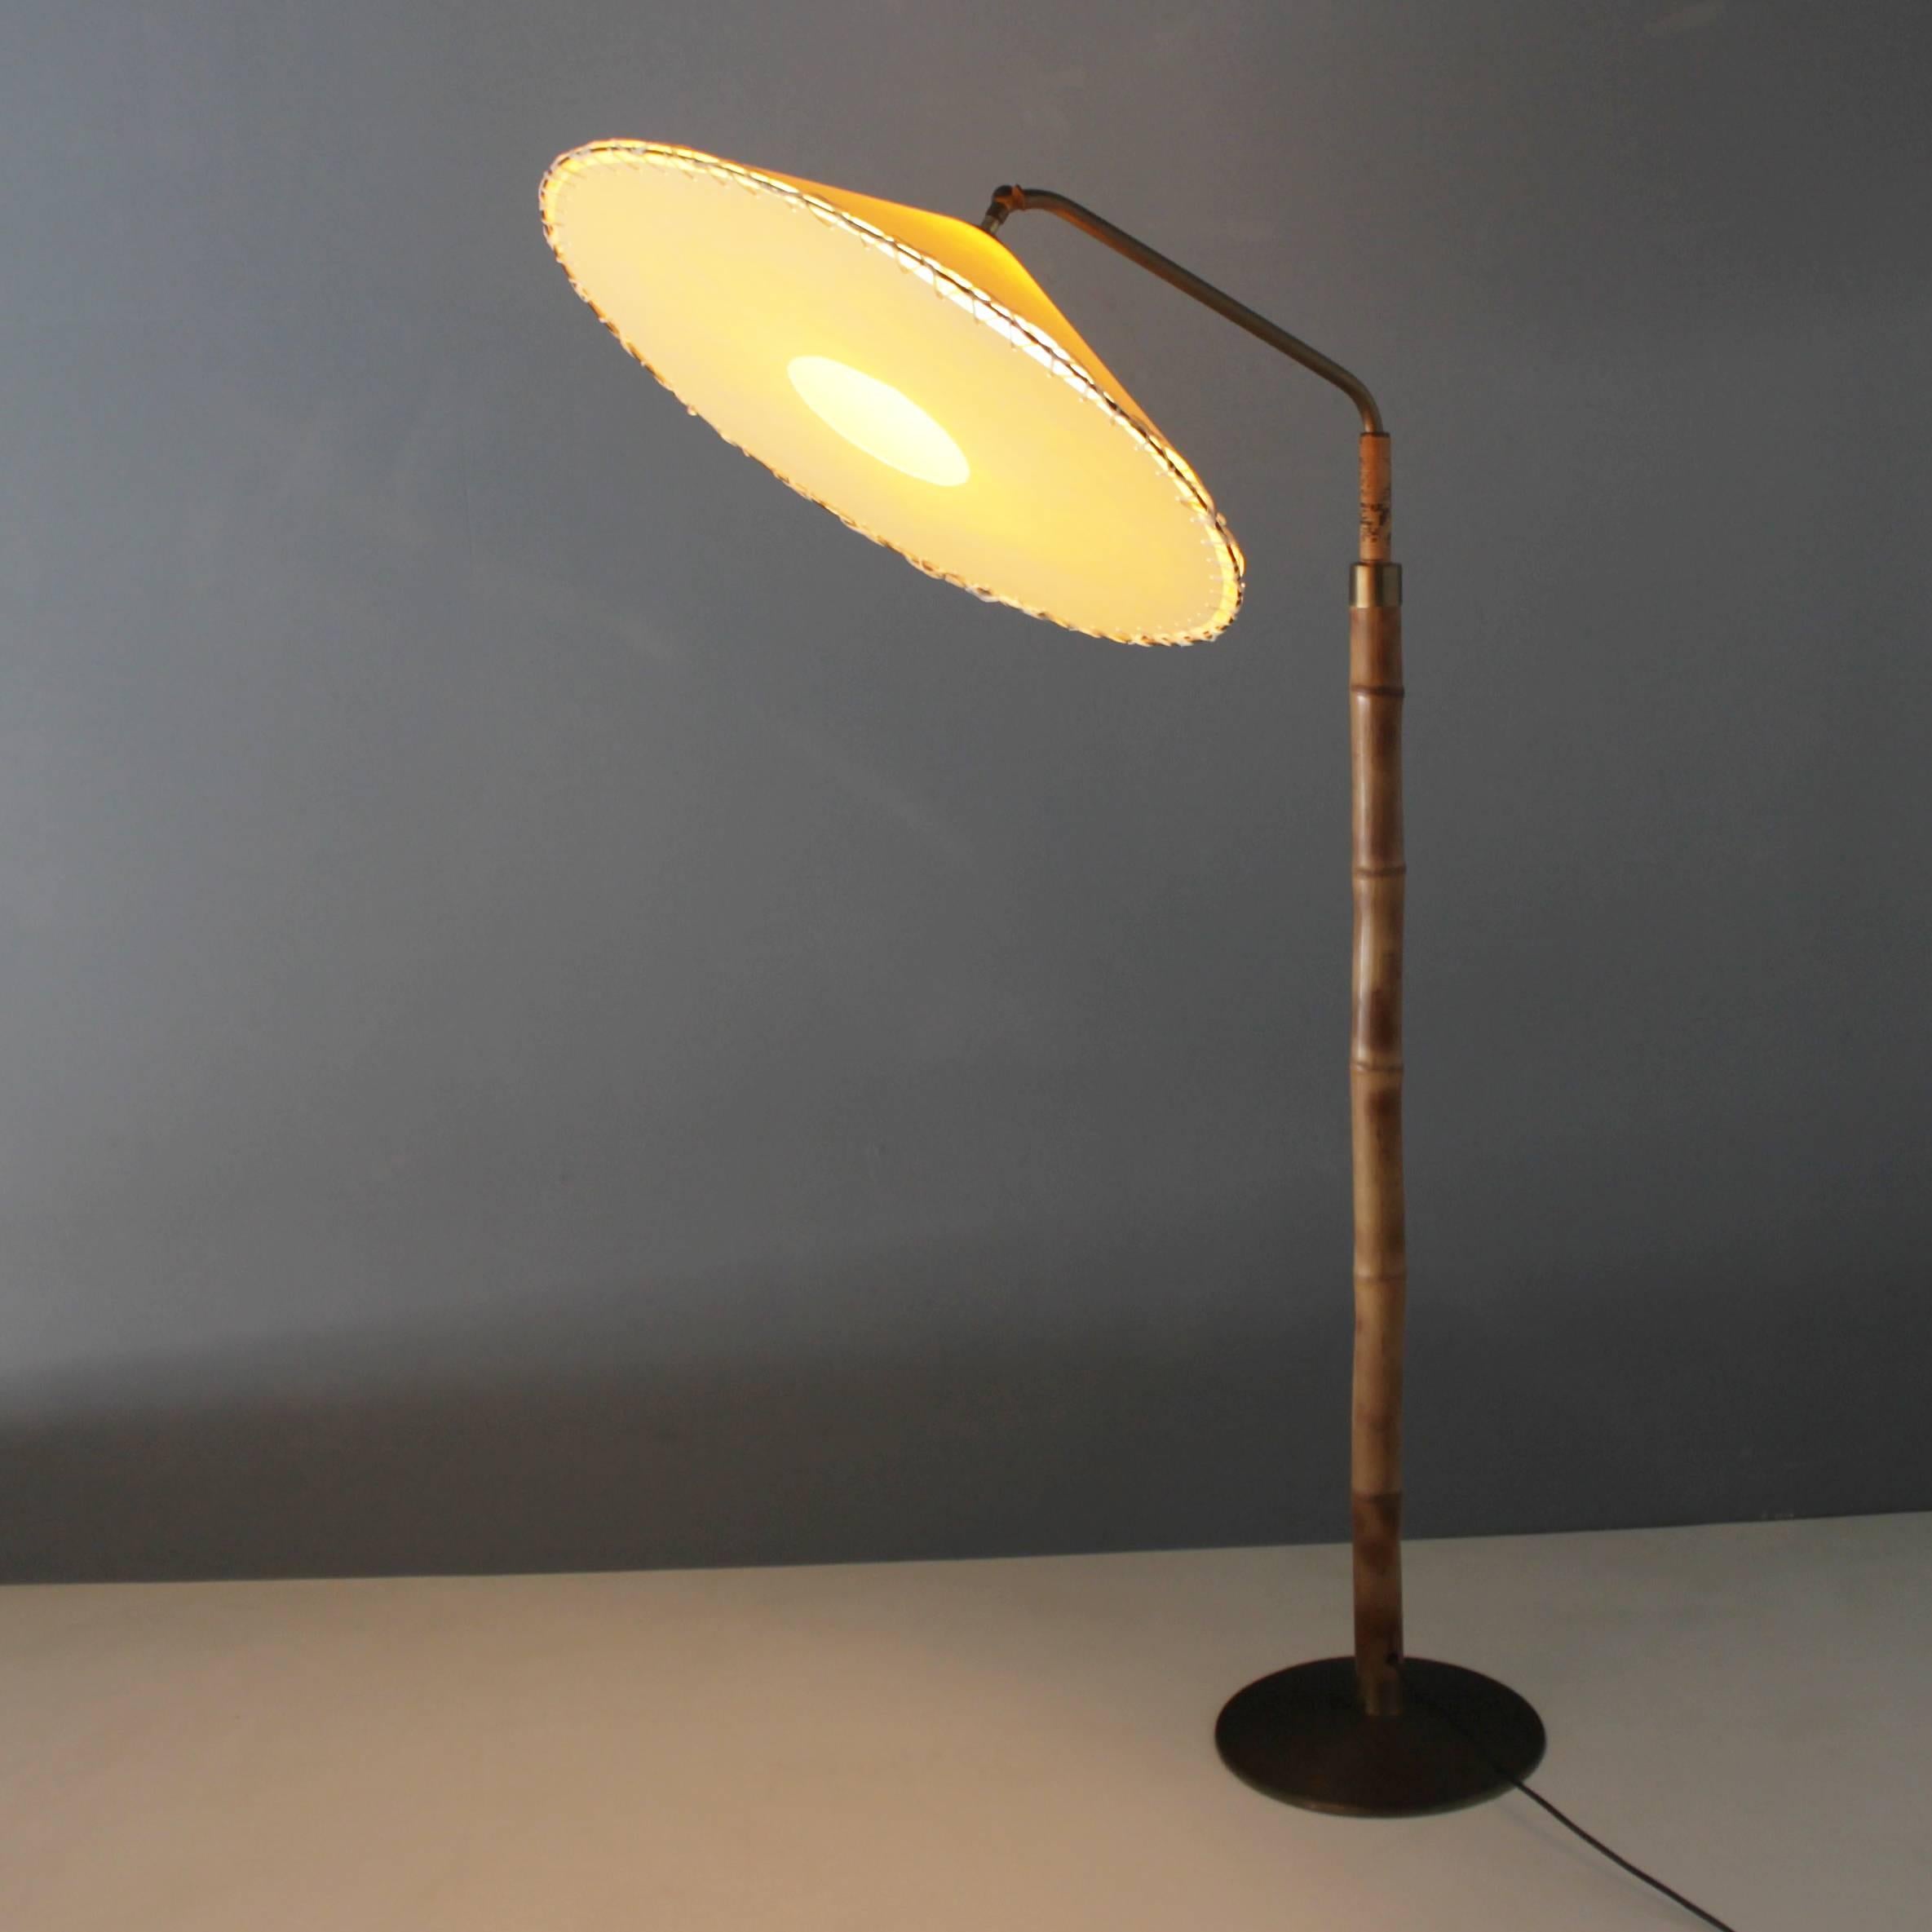 Mid-20th Century Floor Lamp by Pitt Müller Germany from the 1950s